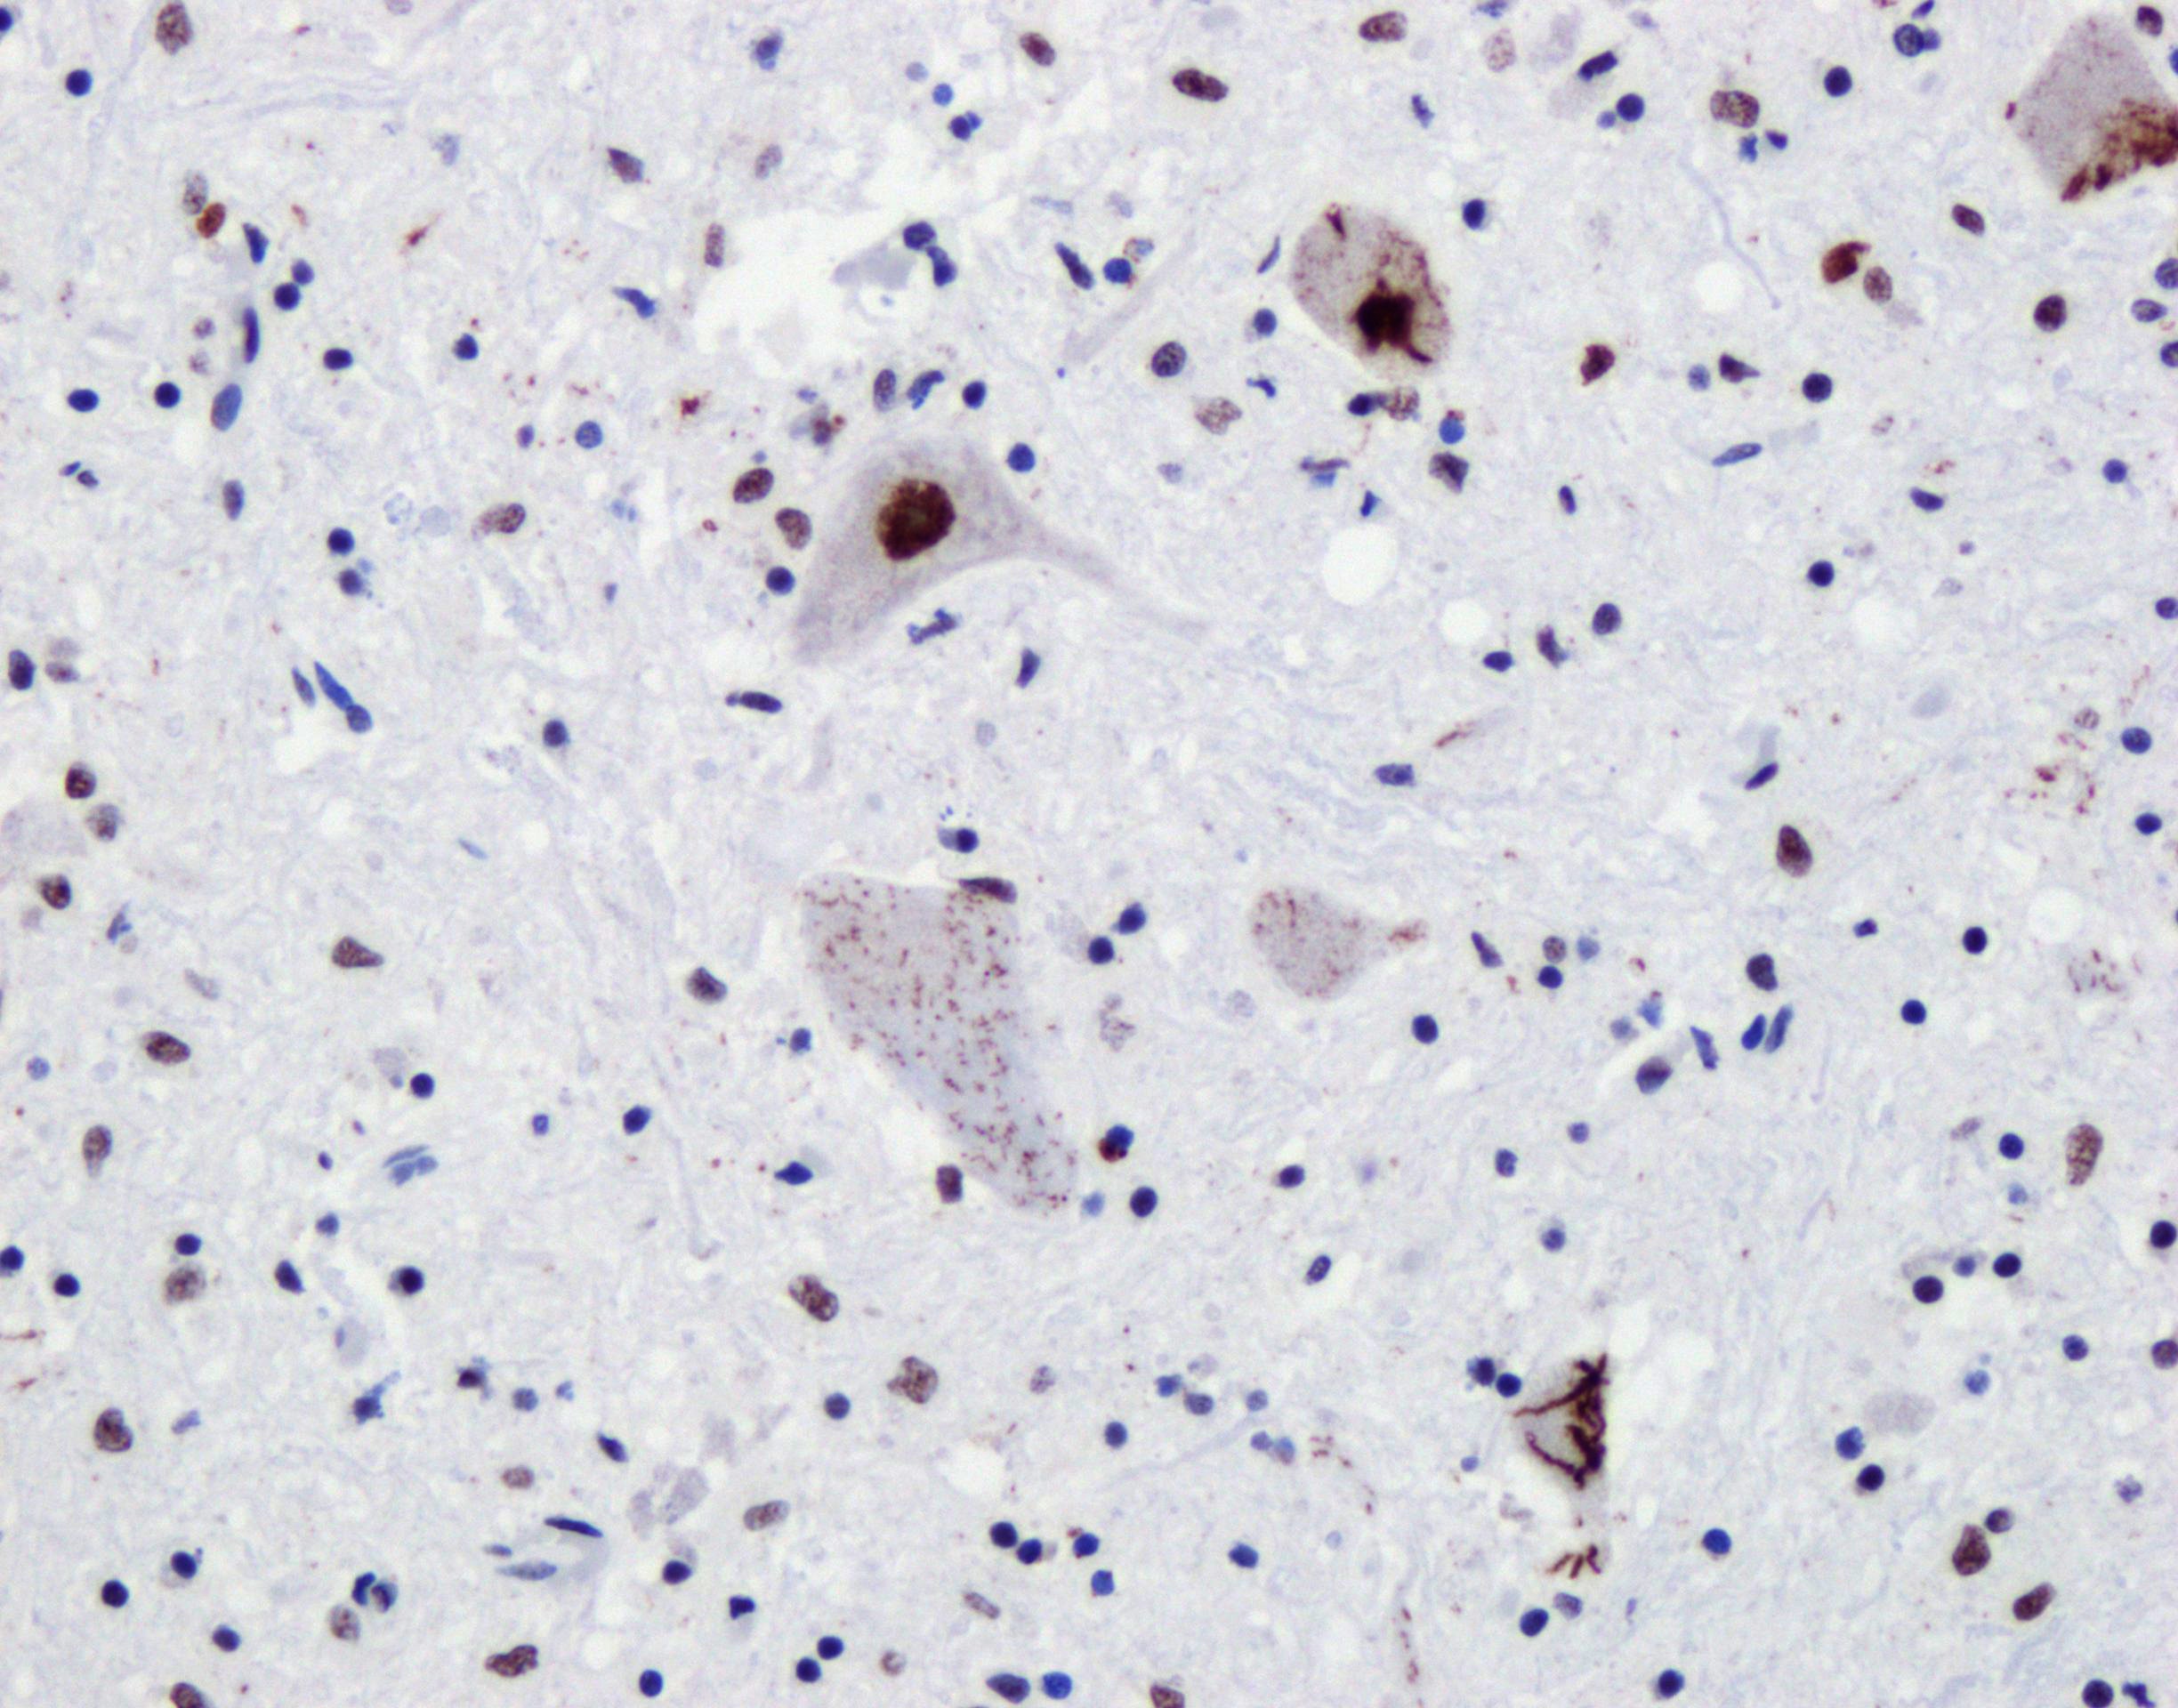 Immunohistochemistry (IHC) staining of spinal cord slides from ALS patients using TDP-43 Recombinant antibody (80001-1-RR)